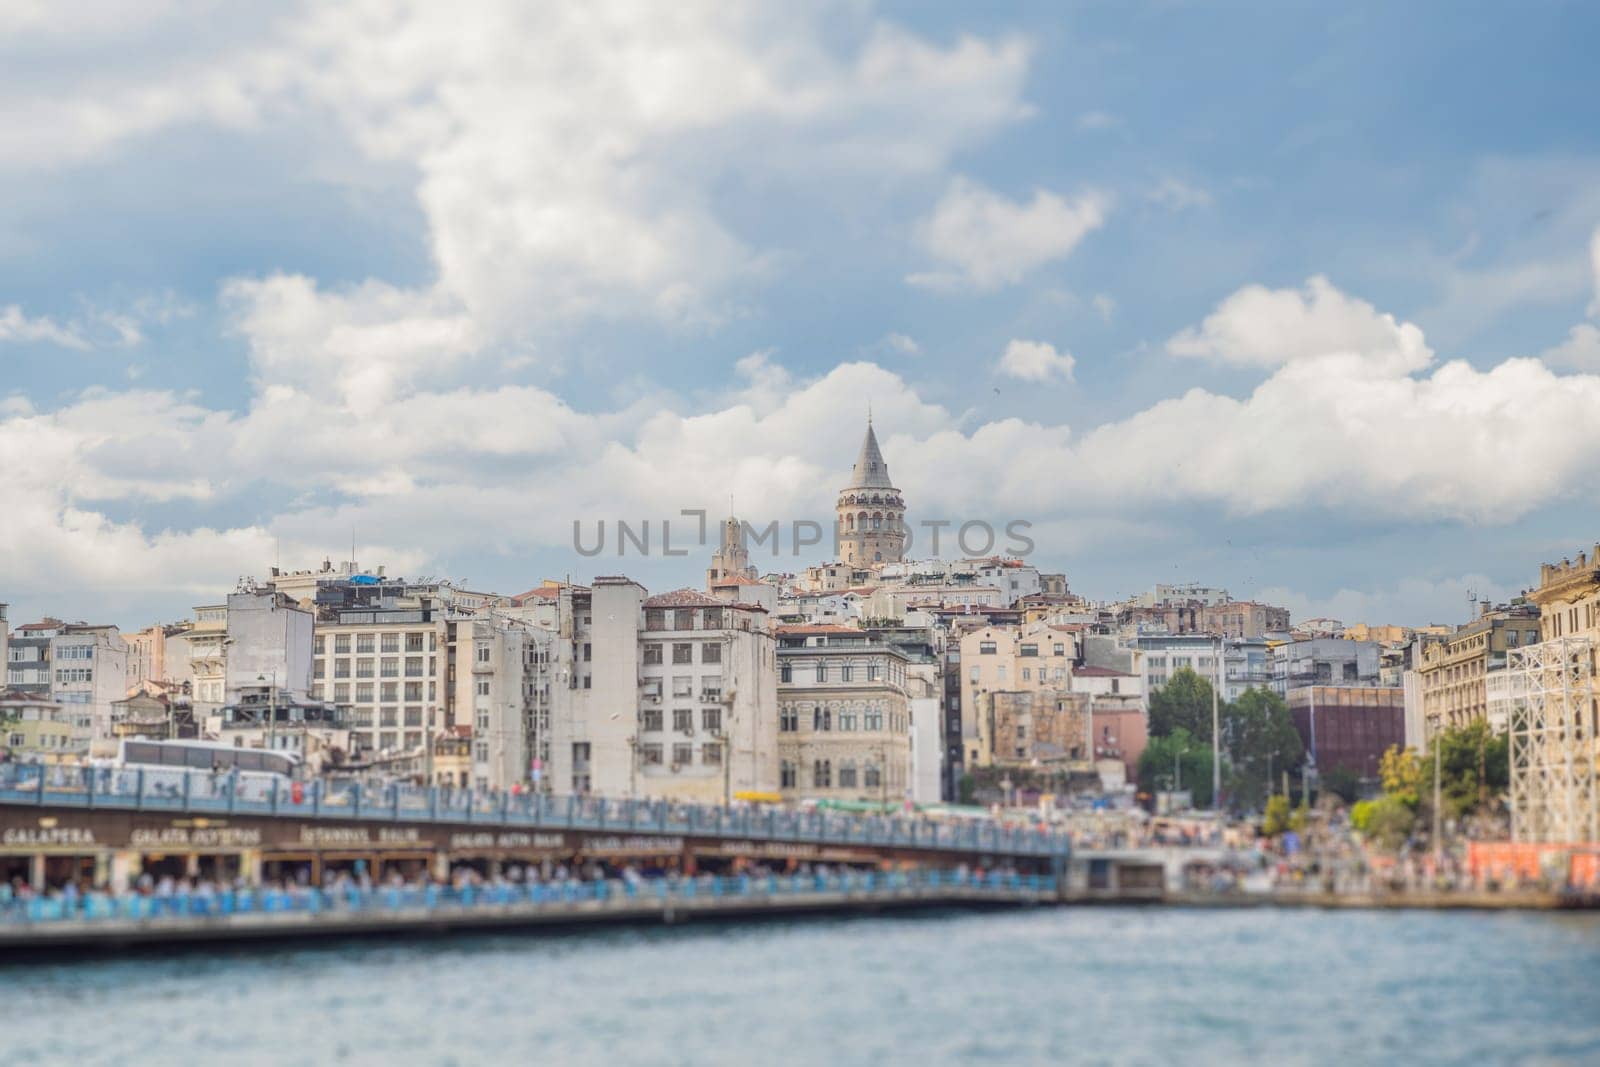 Istanbul city skyline in Turkey, Beyoglu district old houses with Galata tower on top, view from the Golden Horn.